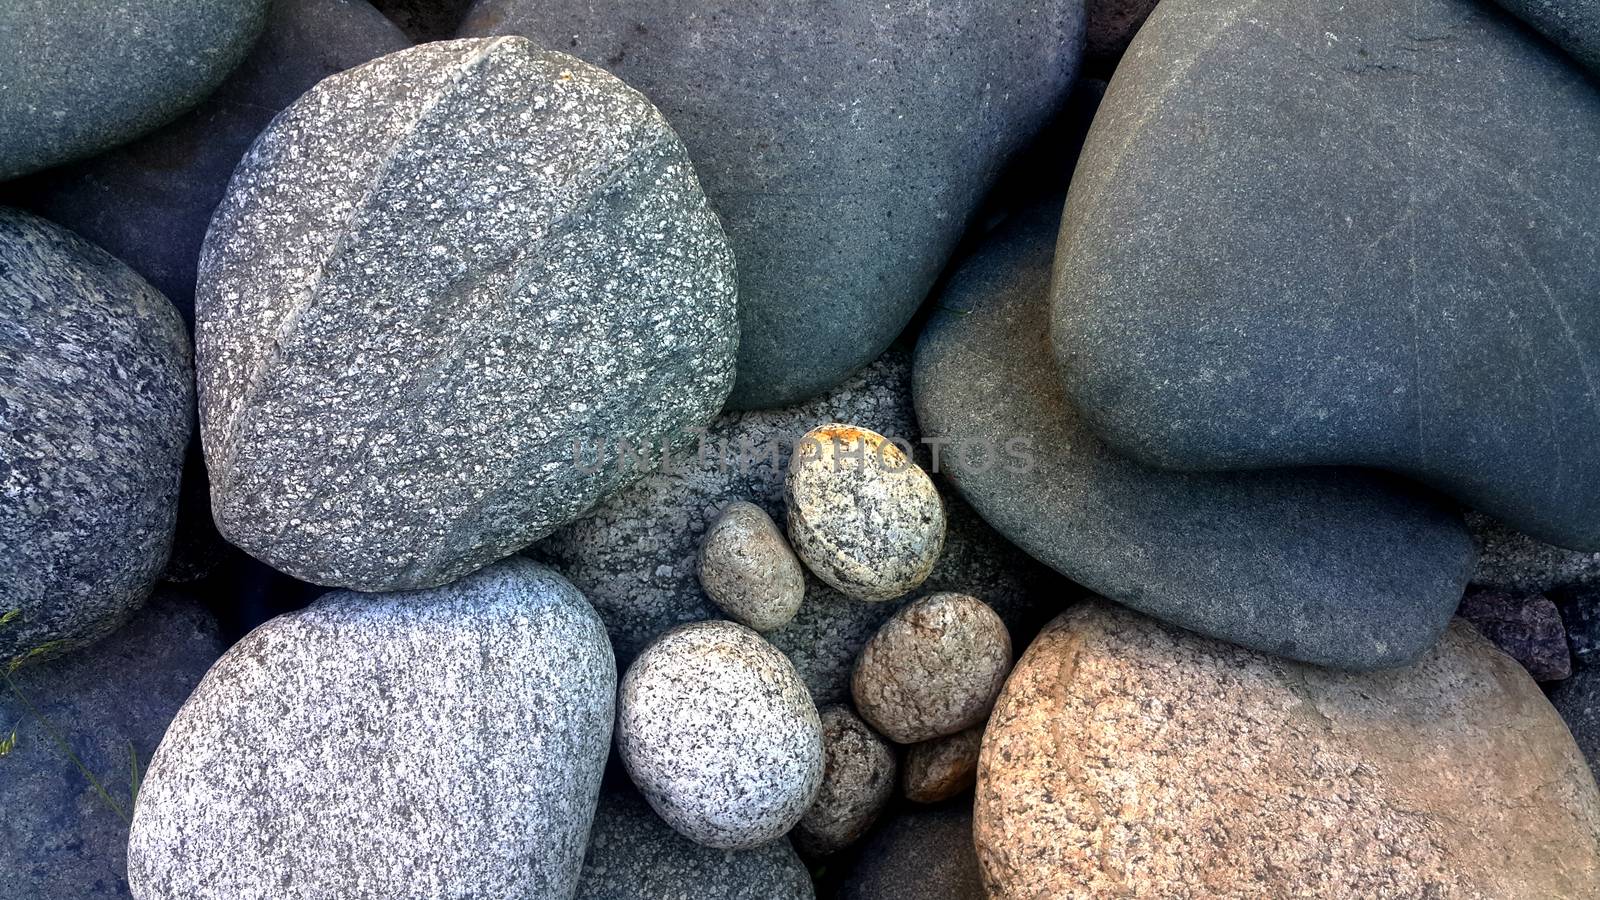 photo of large stones rounded streamlined shape of different shades of gray.